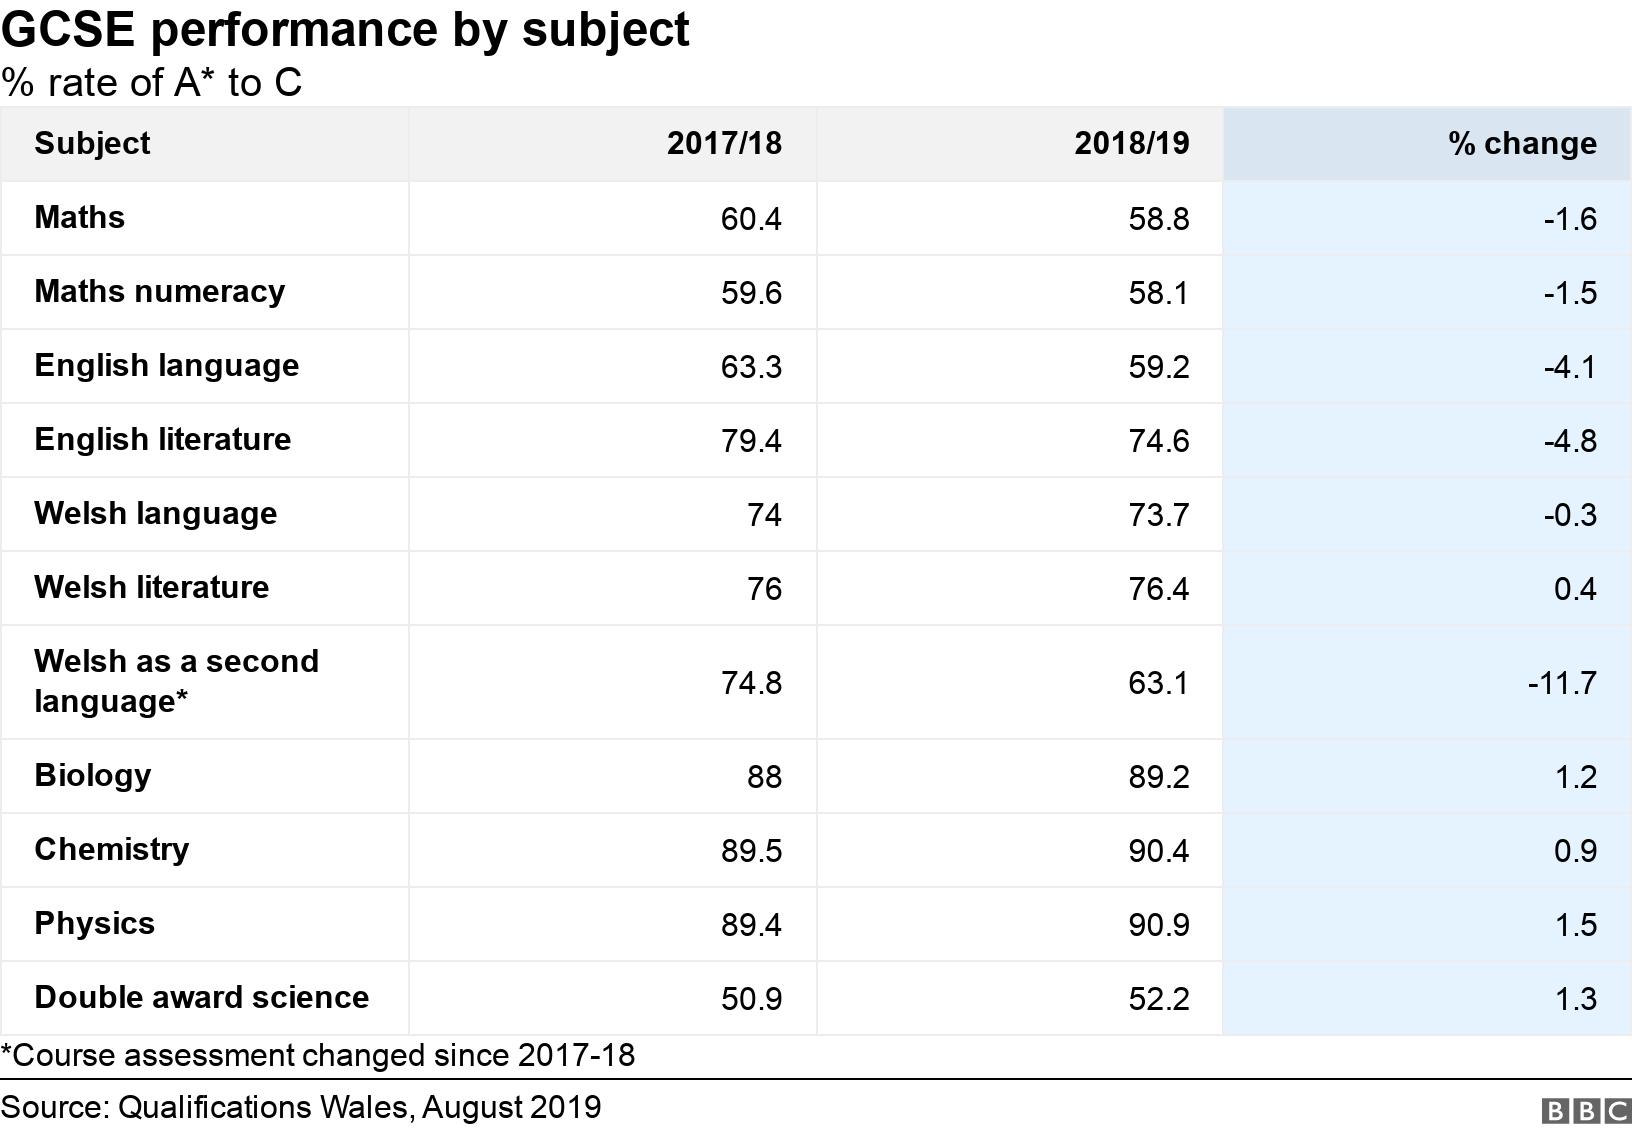 GCSE performance by subject. % rate of A* to C. *Course assessment changed since 2017-18.